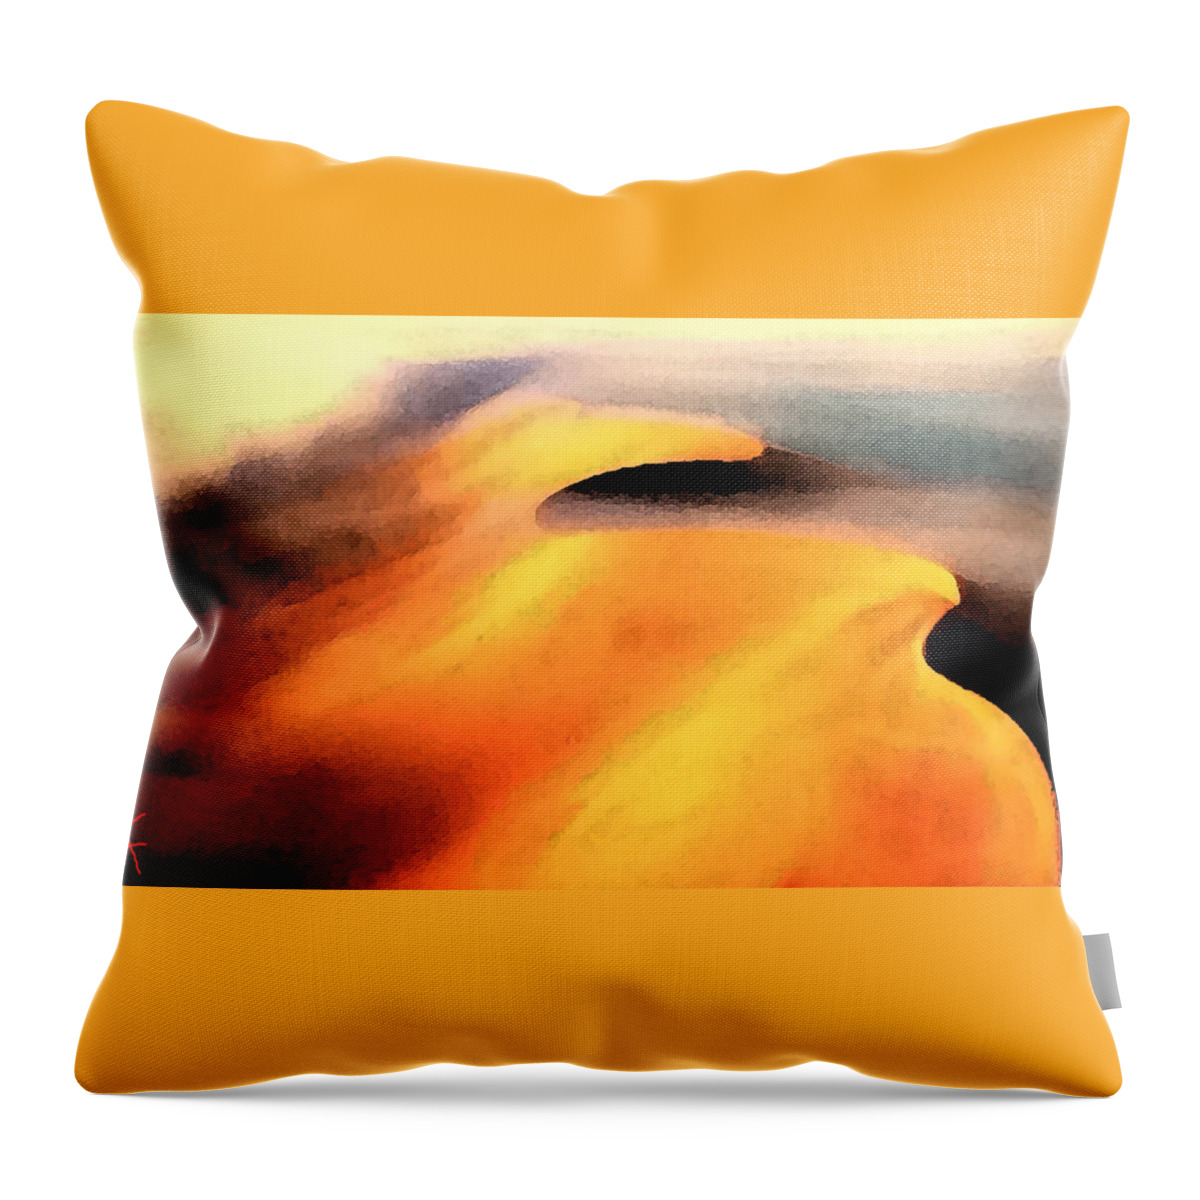 Colette Throw Pillow featuring the photograph Nature Shapes  by Colette V Hera Guggenheim